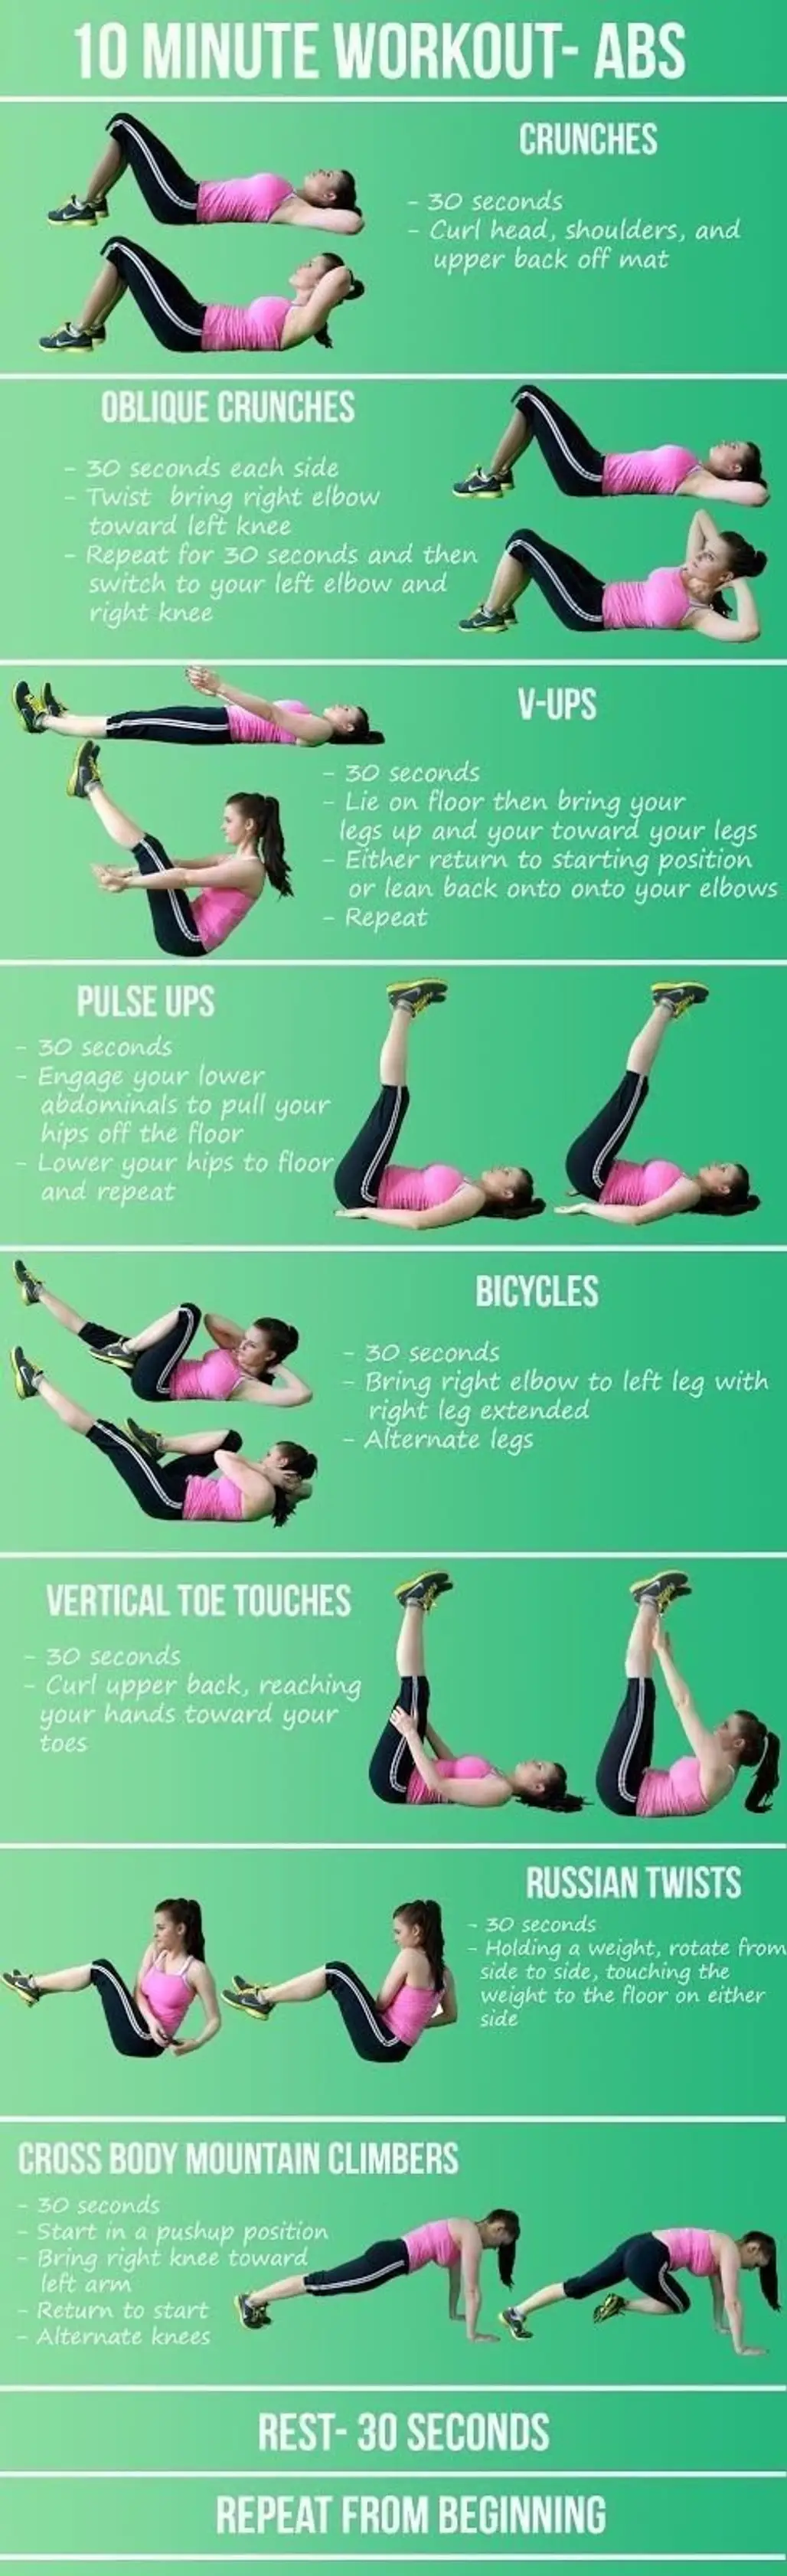 10 Minutes for Your Abs